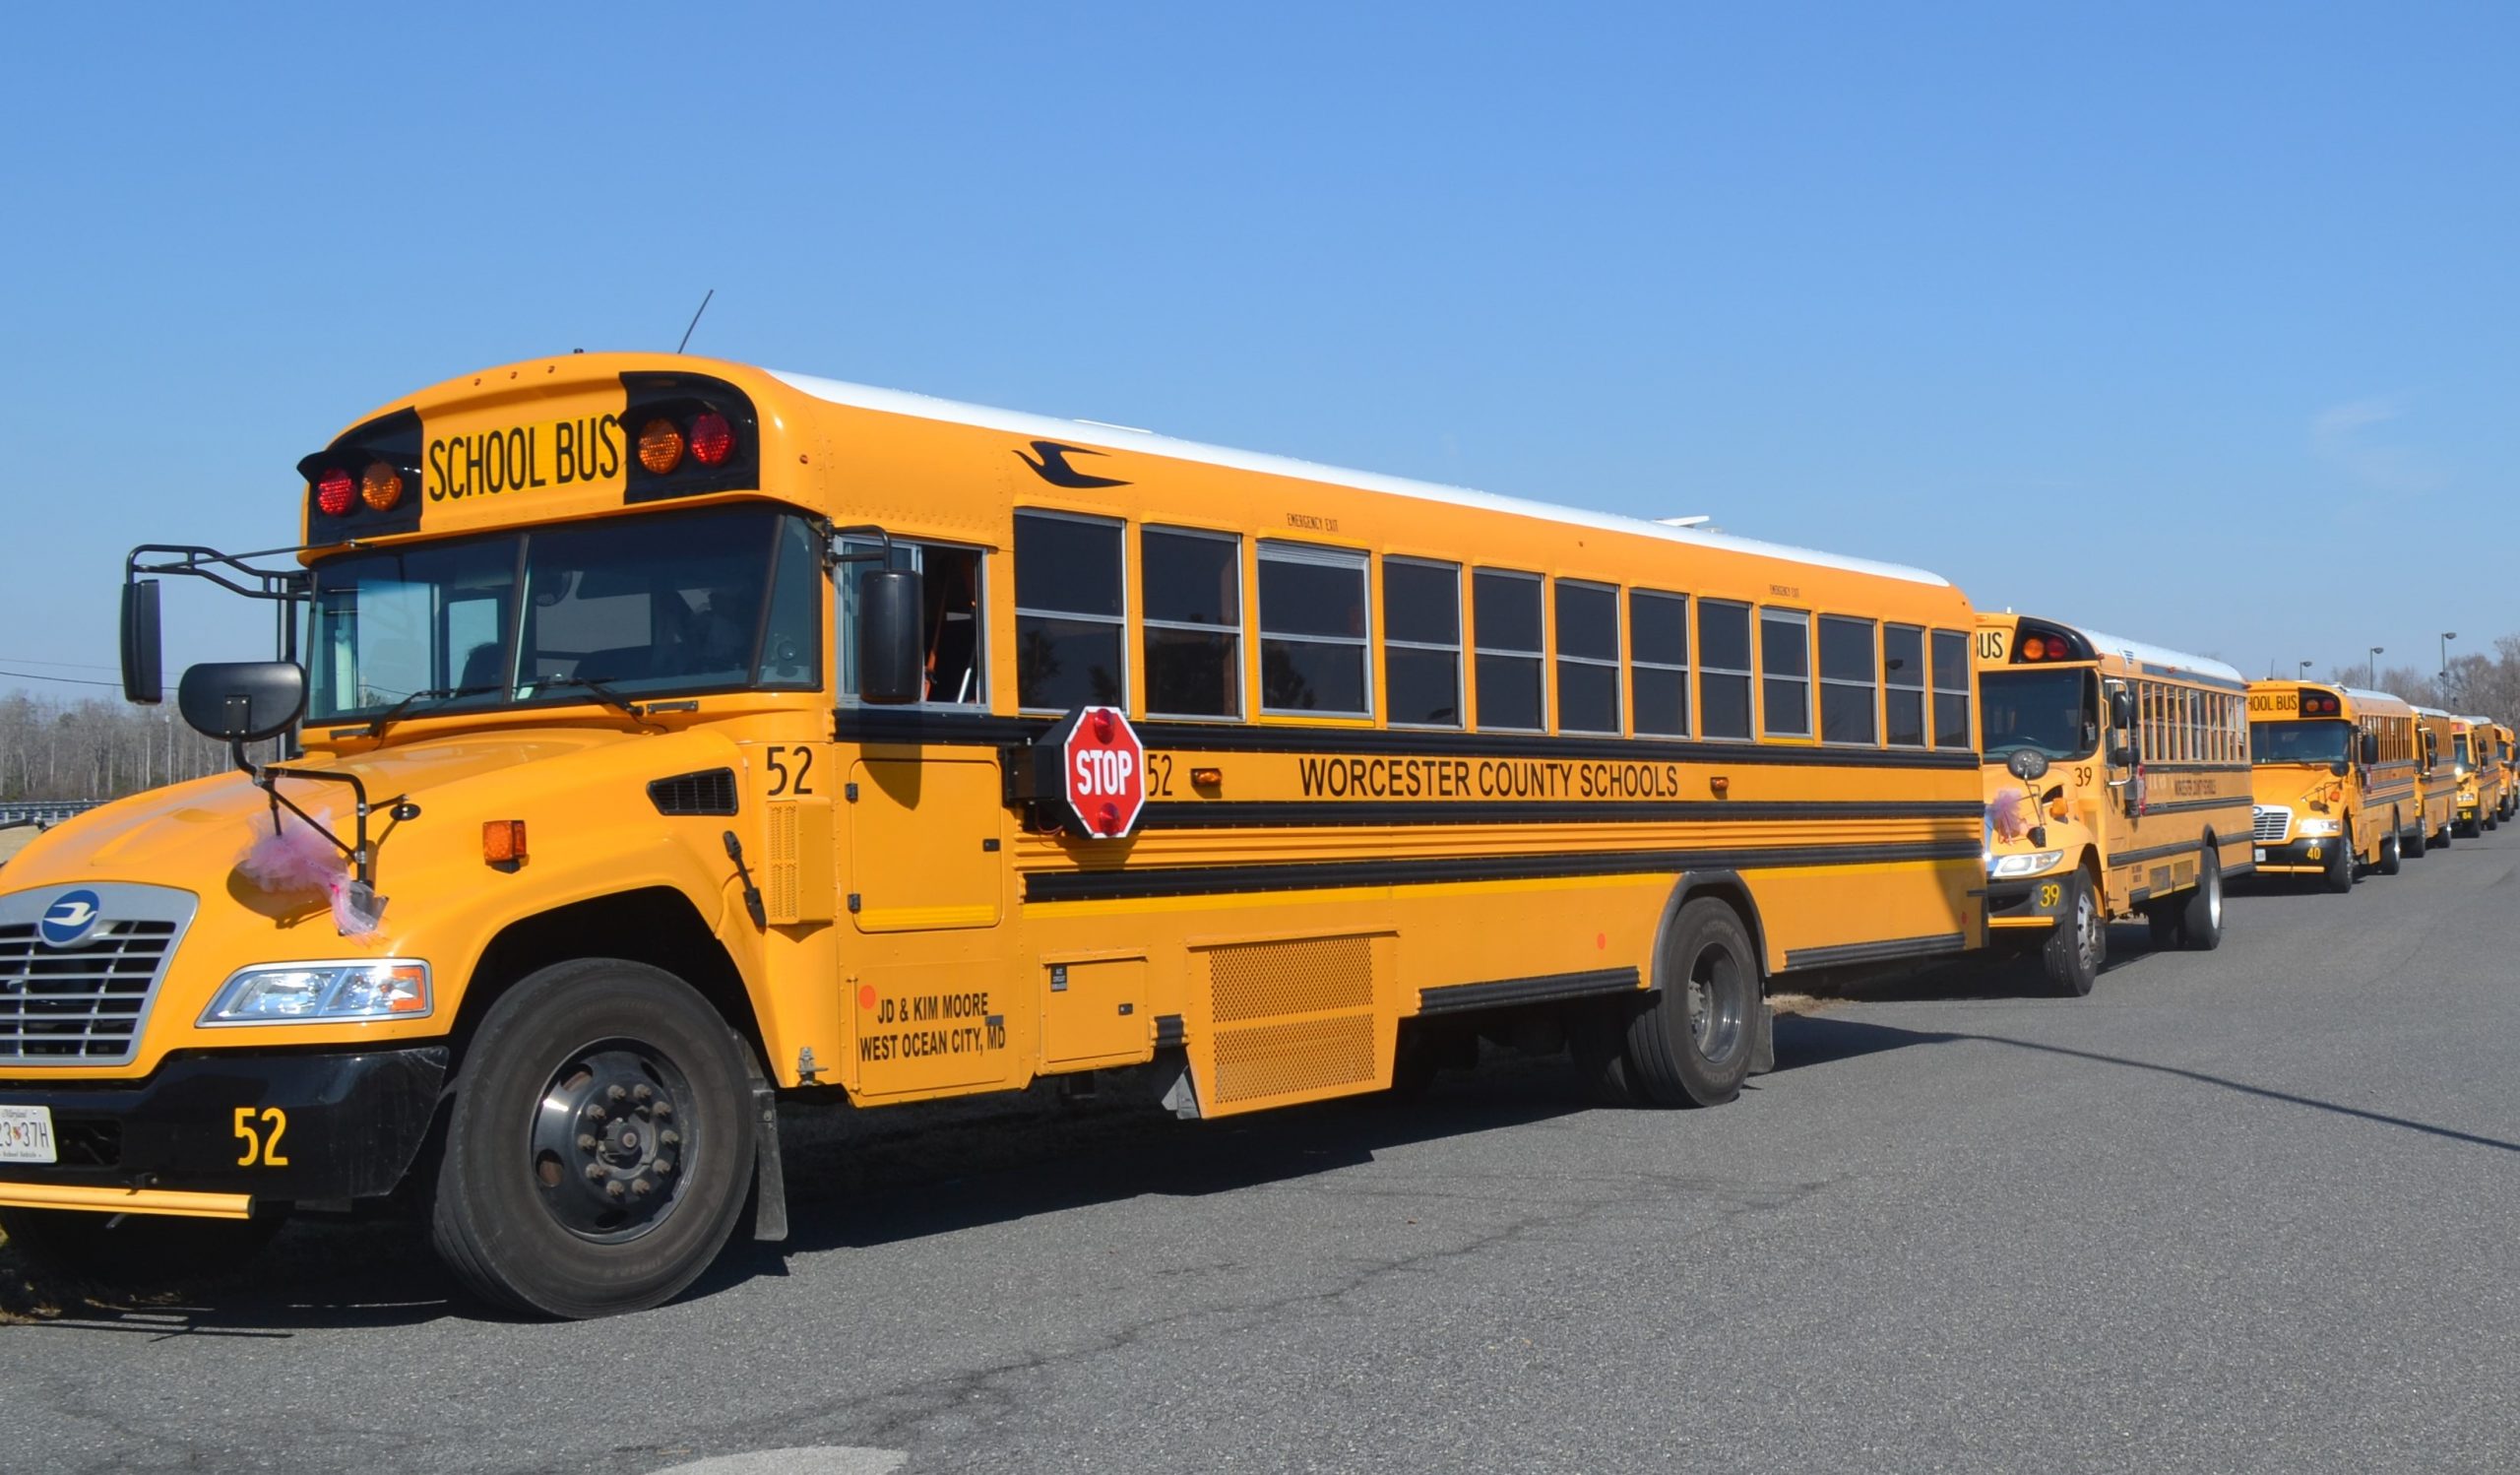 School board stands by decision not to increase bus driver wages further